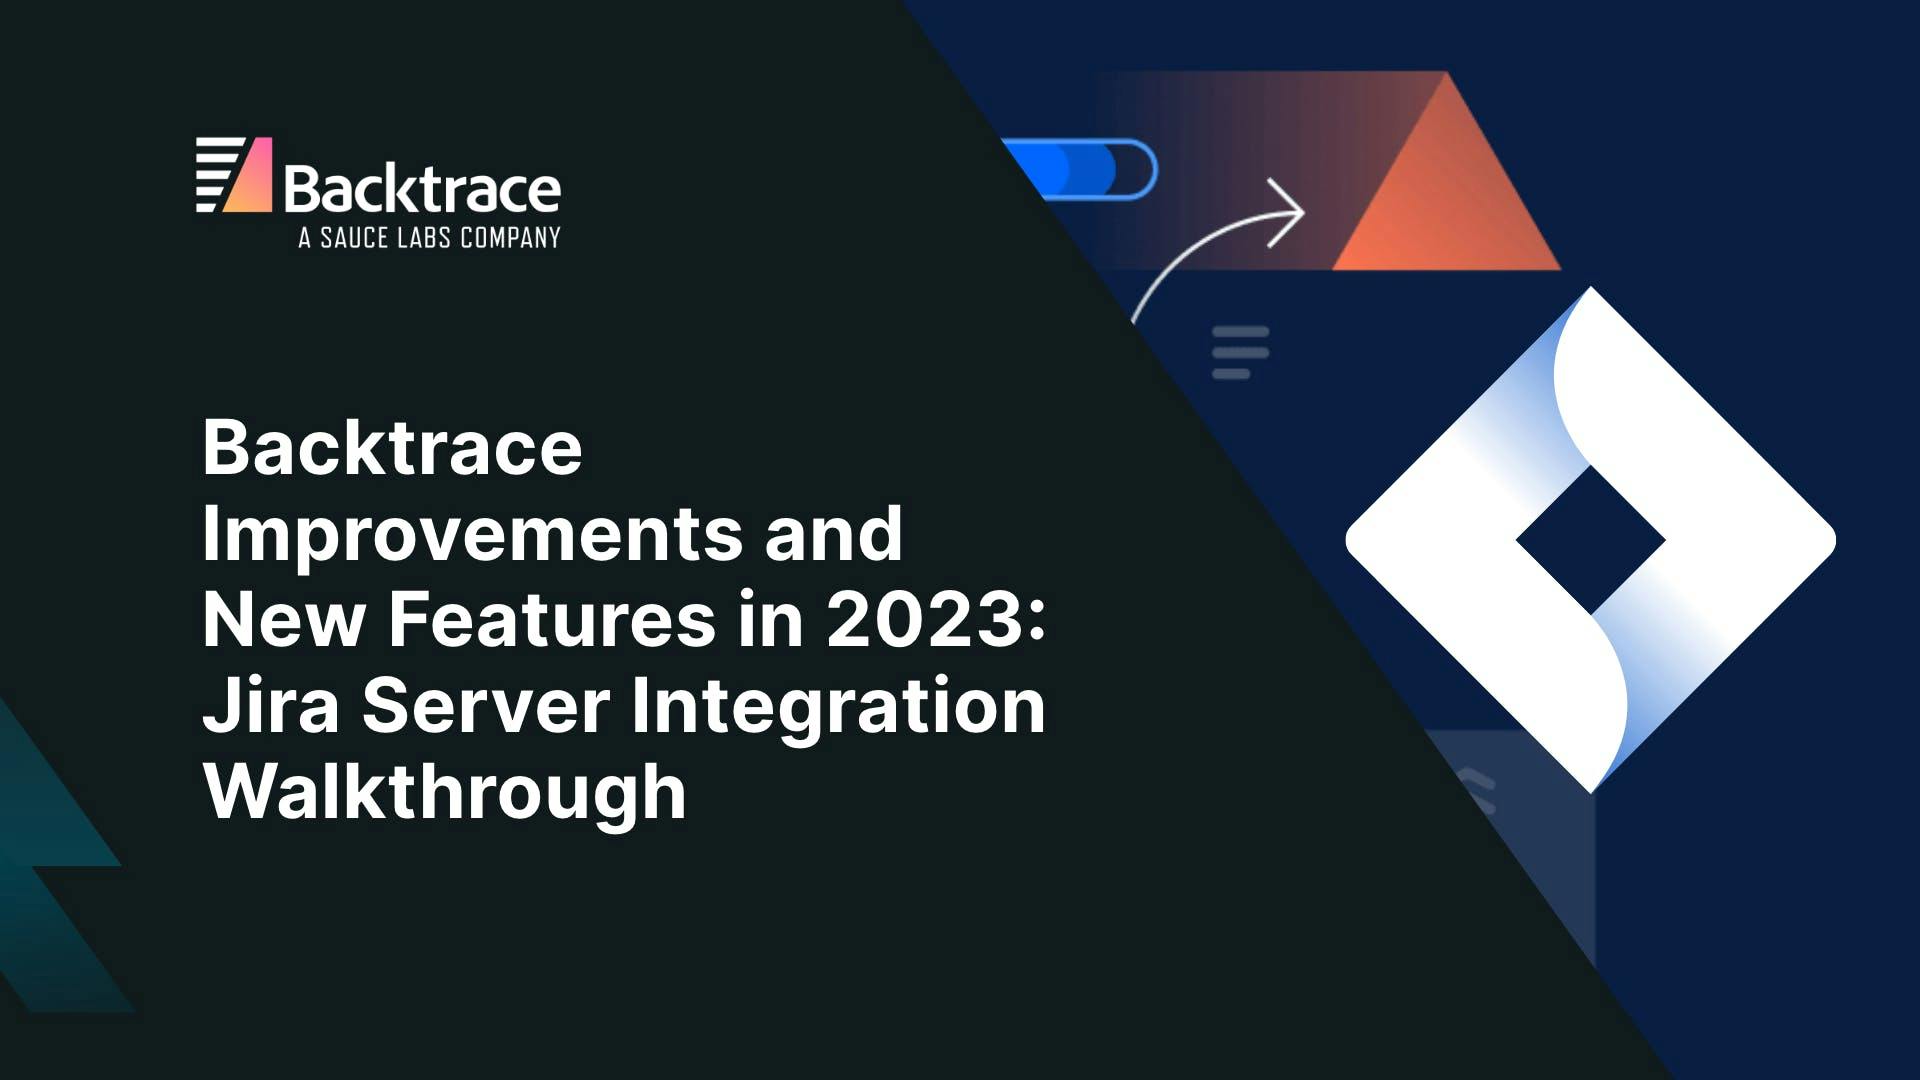 Thumbnail image for blog post: Backtrace Improvements and New Features in 2023: Jira Server Integration Walkthrough